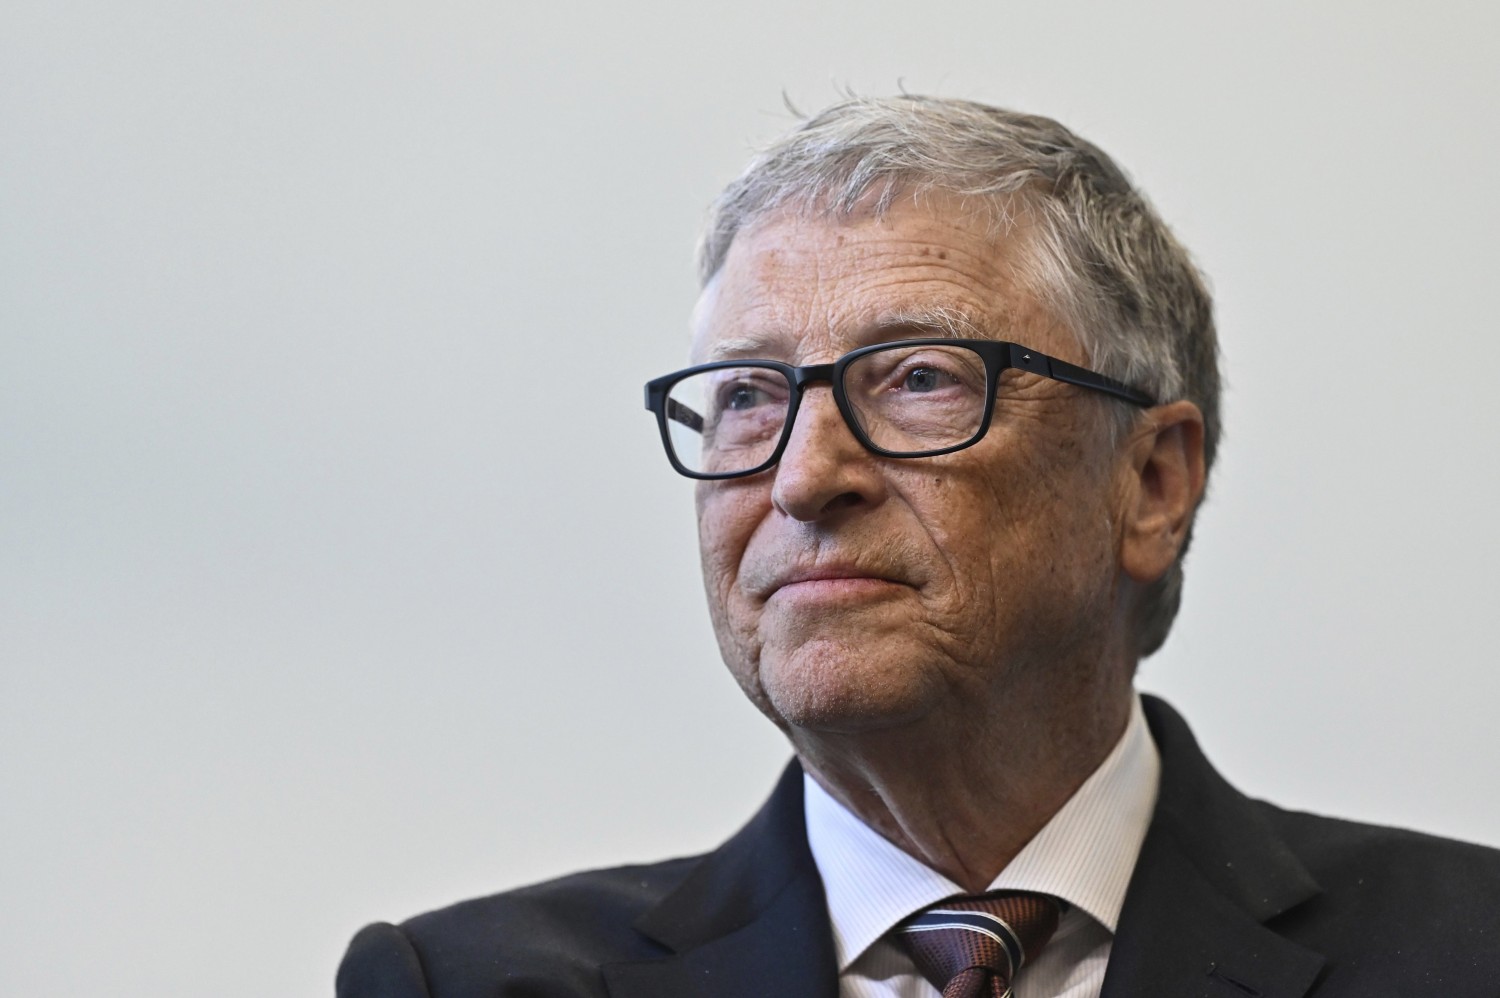 Bill Gates visits China as leaders try to revive foreign business interest